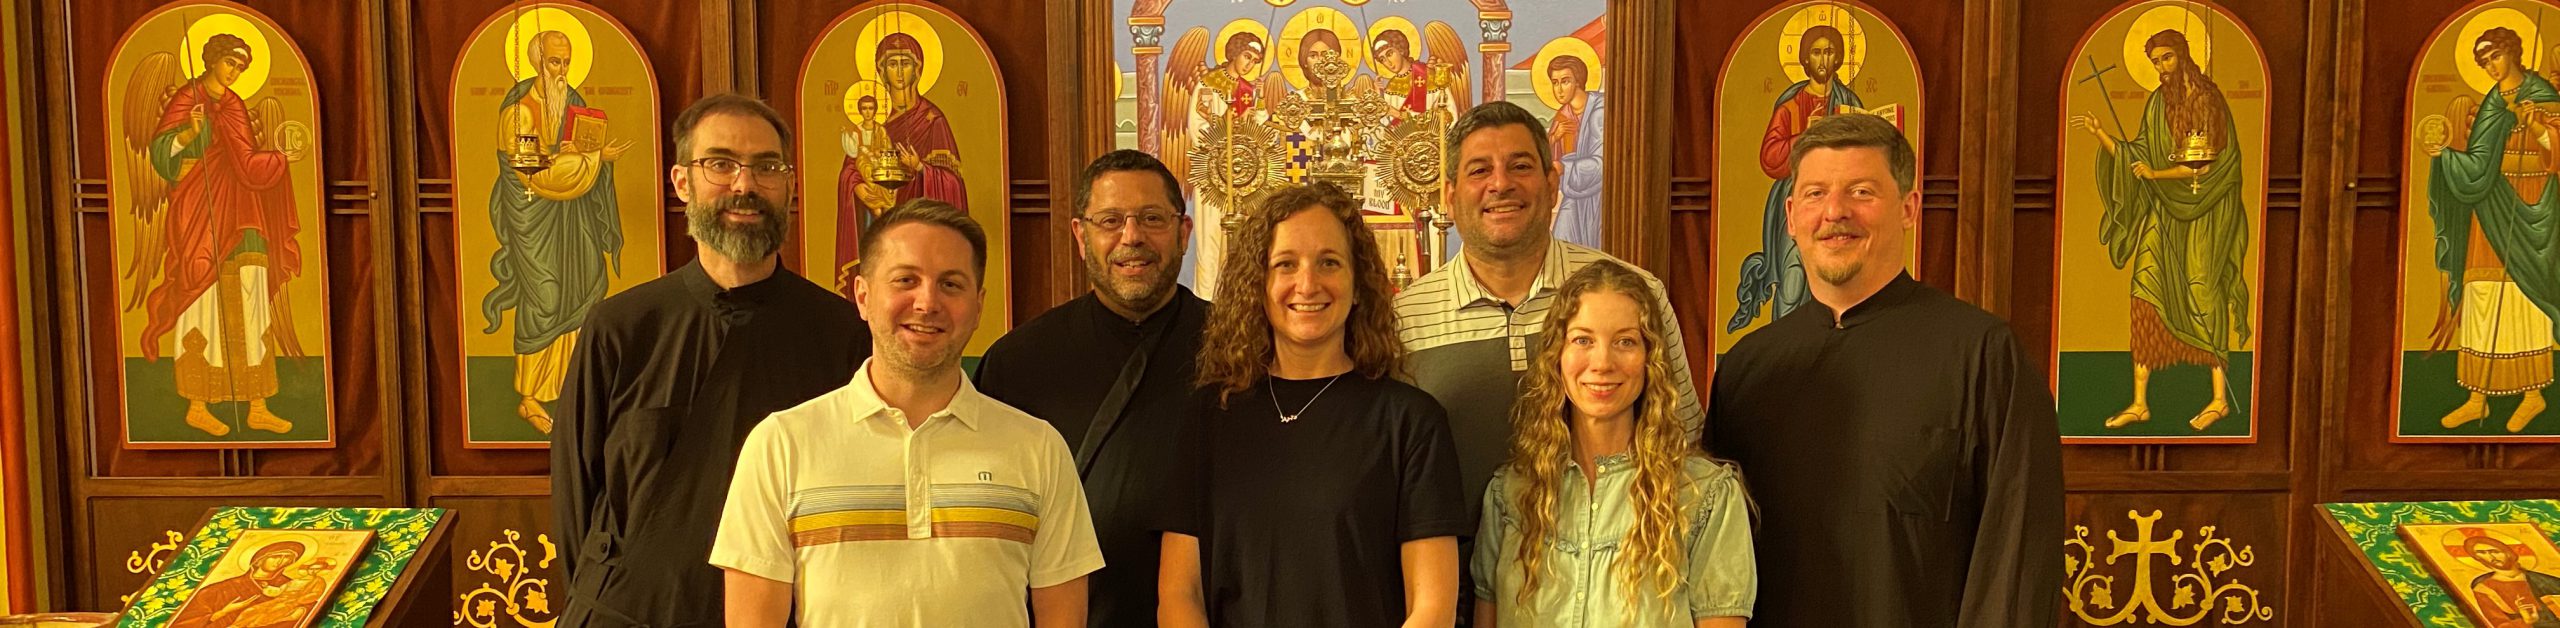 Archdiocesan Task Force for Youth & Young Adult Ministry